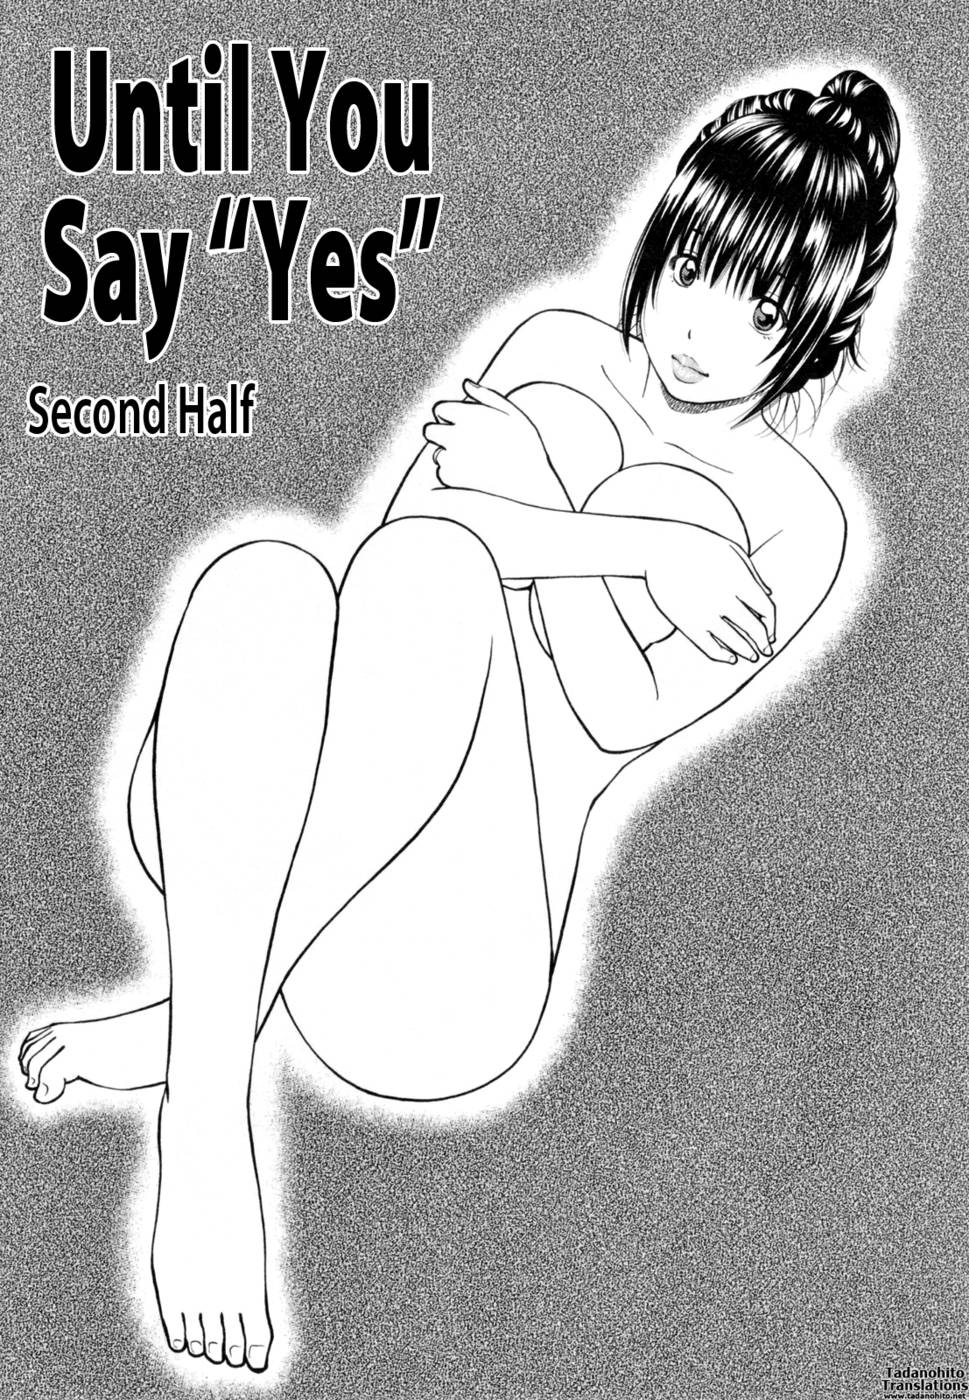 Hentai Manga Comic-32 Year Old Unsatisfied Wife-Chapter 2-Until You Say Yes-1